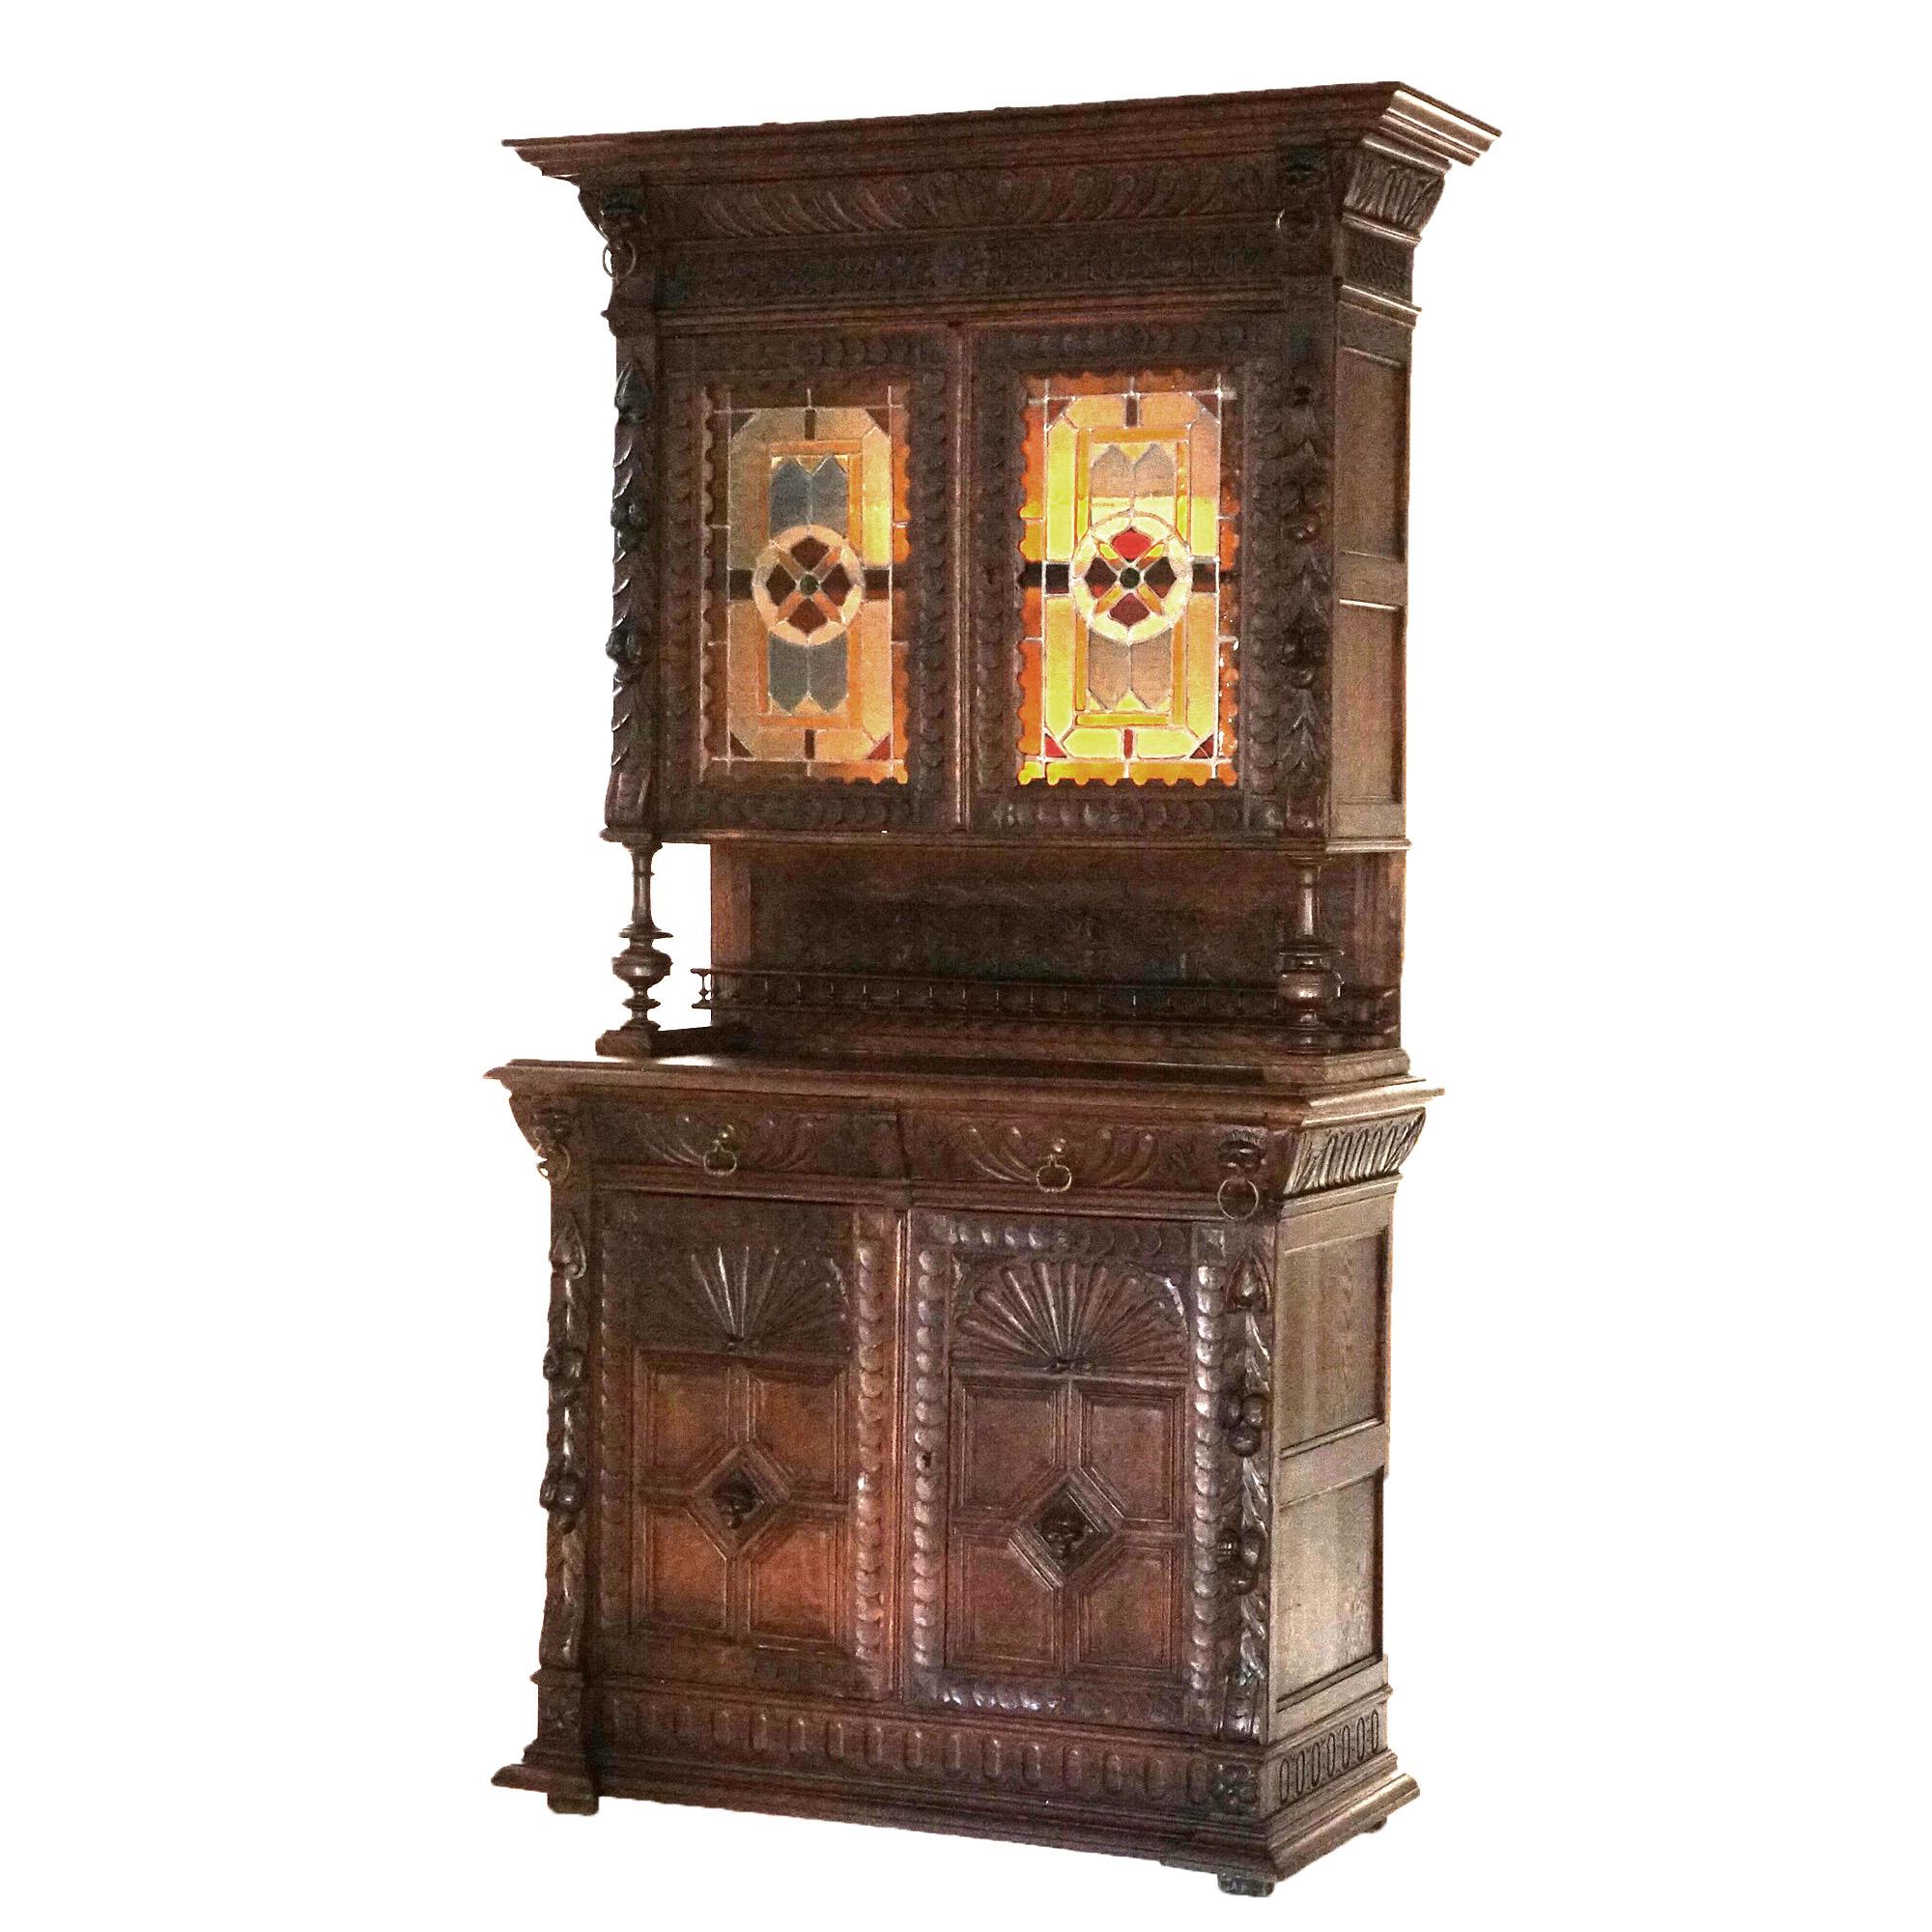 An antique French Renaissance figural sideboard offers deeply carved oak construction with upper having cabinet with leaded stained glass doors opening to shelved interior surmounting lower case with balustrade supports, two drawers and double door